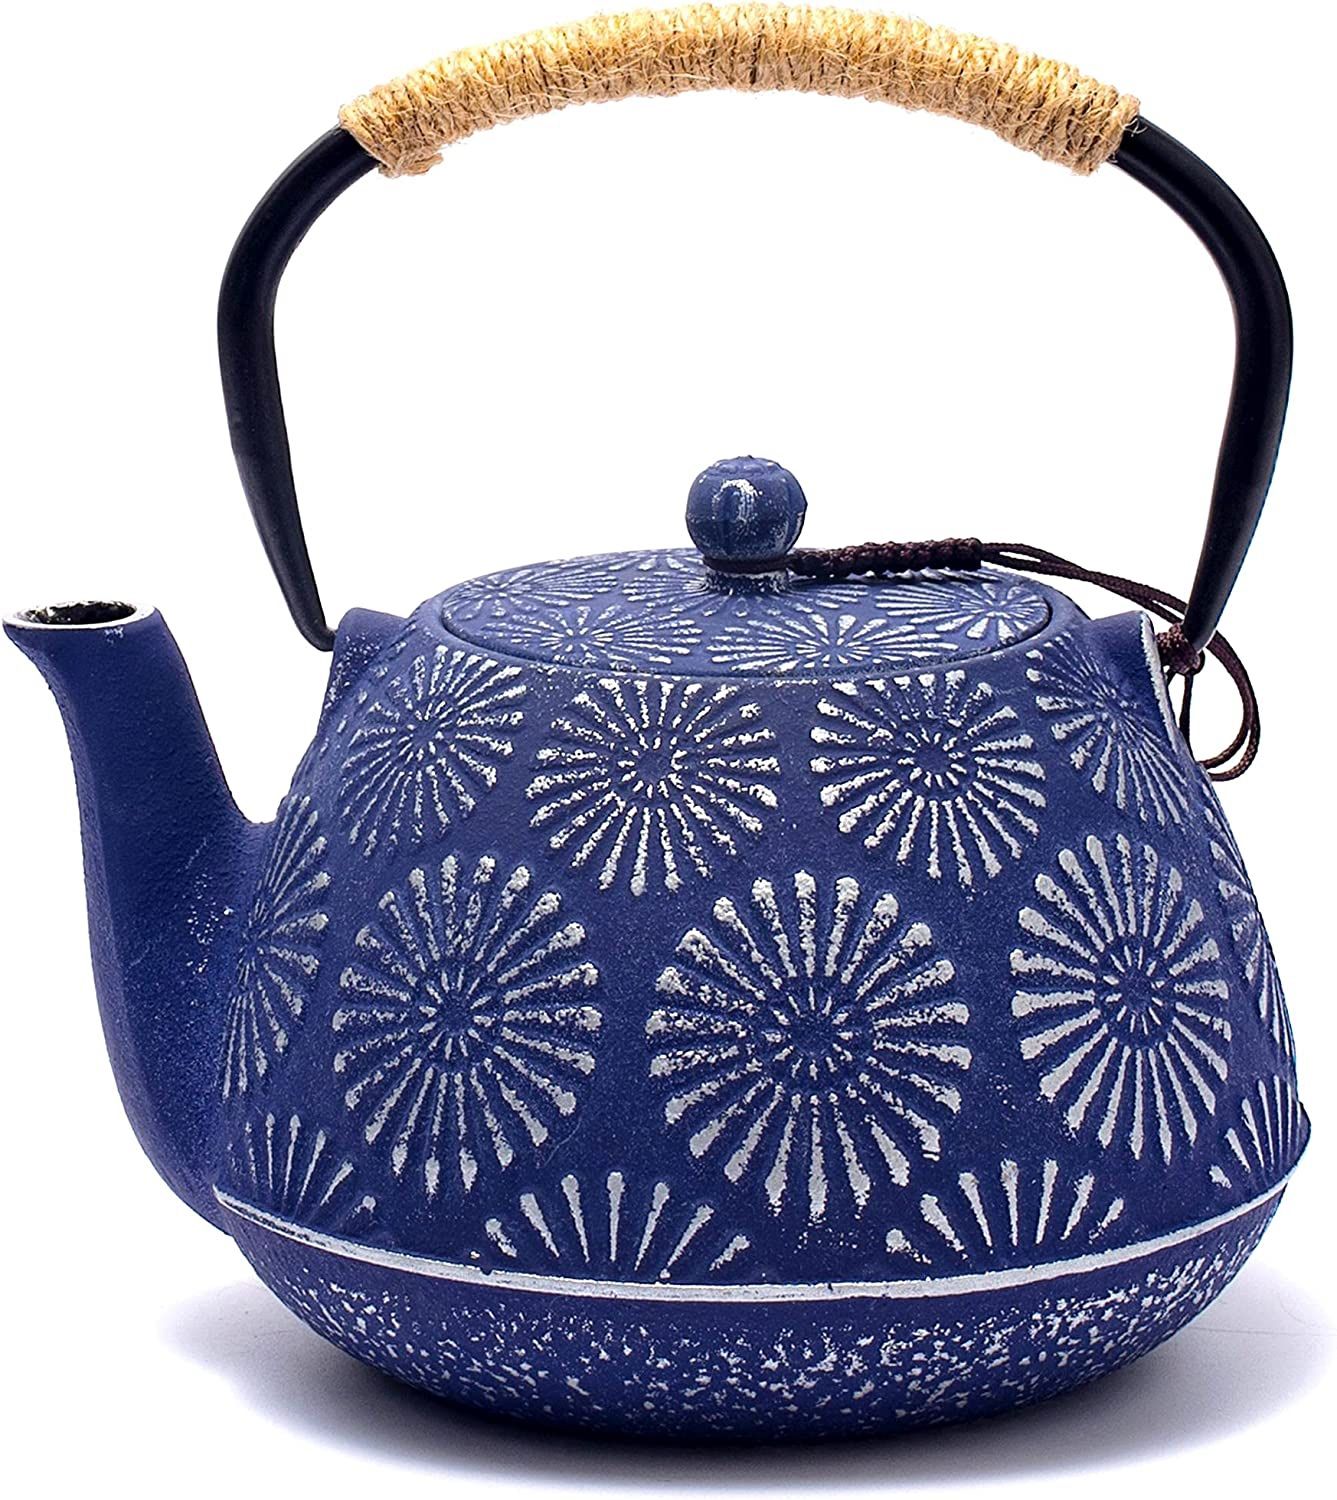 Cast Iron Teapot, Large Capacity 40oz Tea Kettle with Infuser for Stove Top, Sakura Design Japanese Tea Pot for Loose Leaf Coated with Enameled Interi